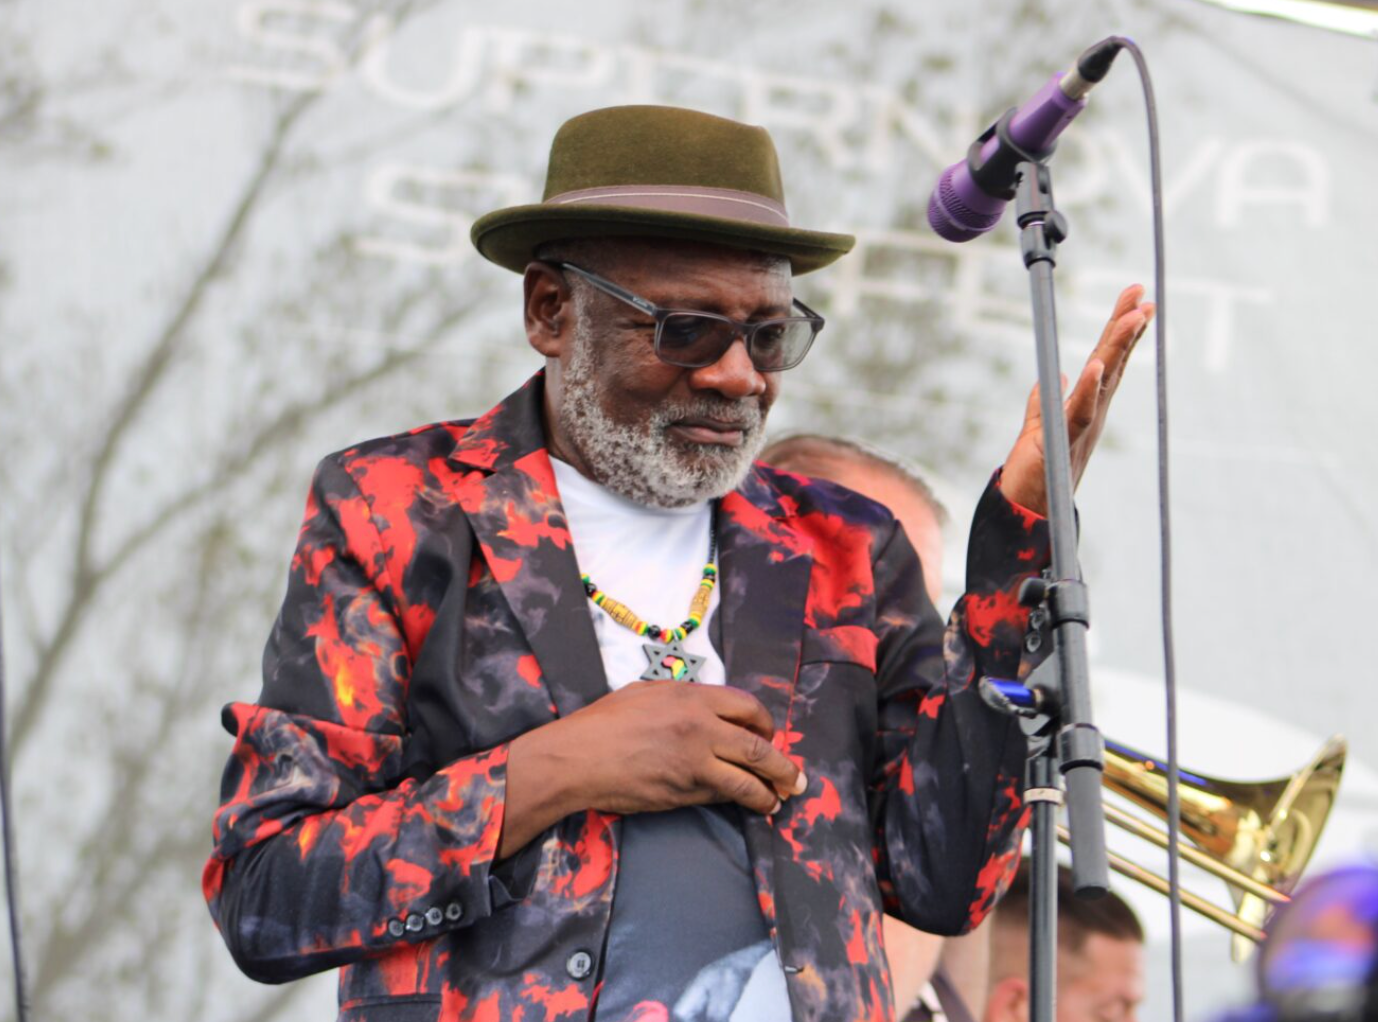 Lynval Golding, original and founding member of the Specials, guesting with the Aggrolites. (Credit: Frank Augustyn)